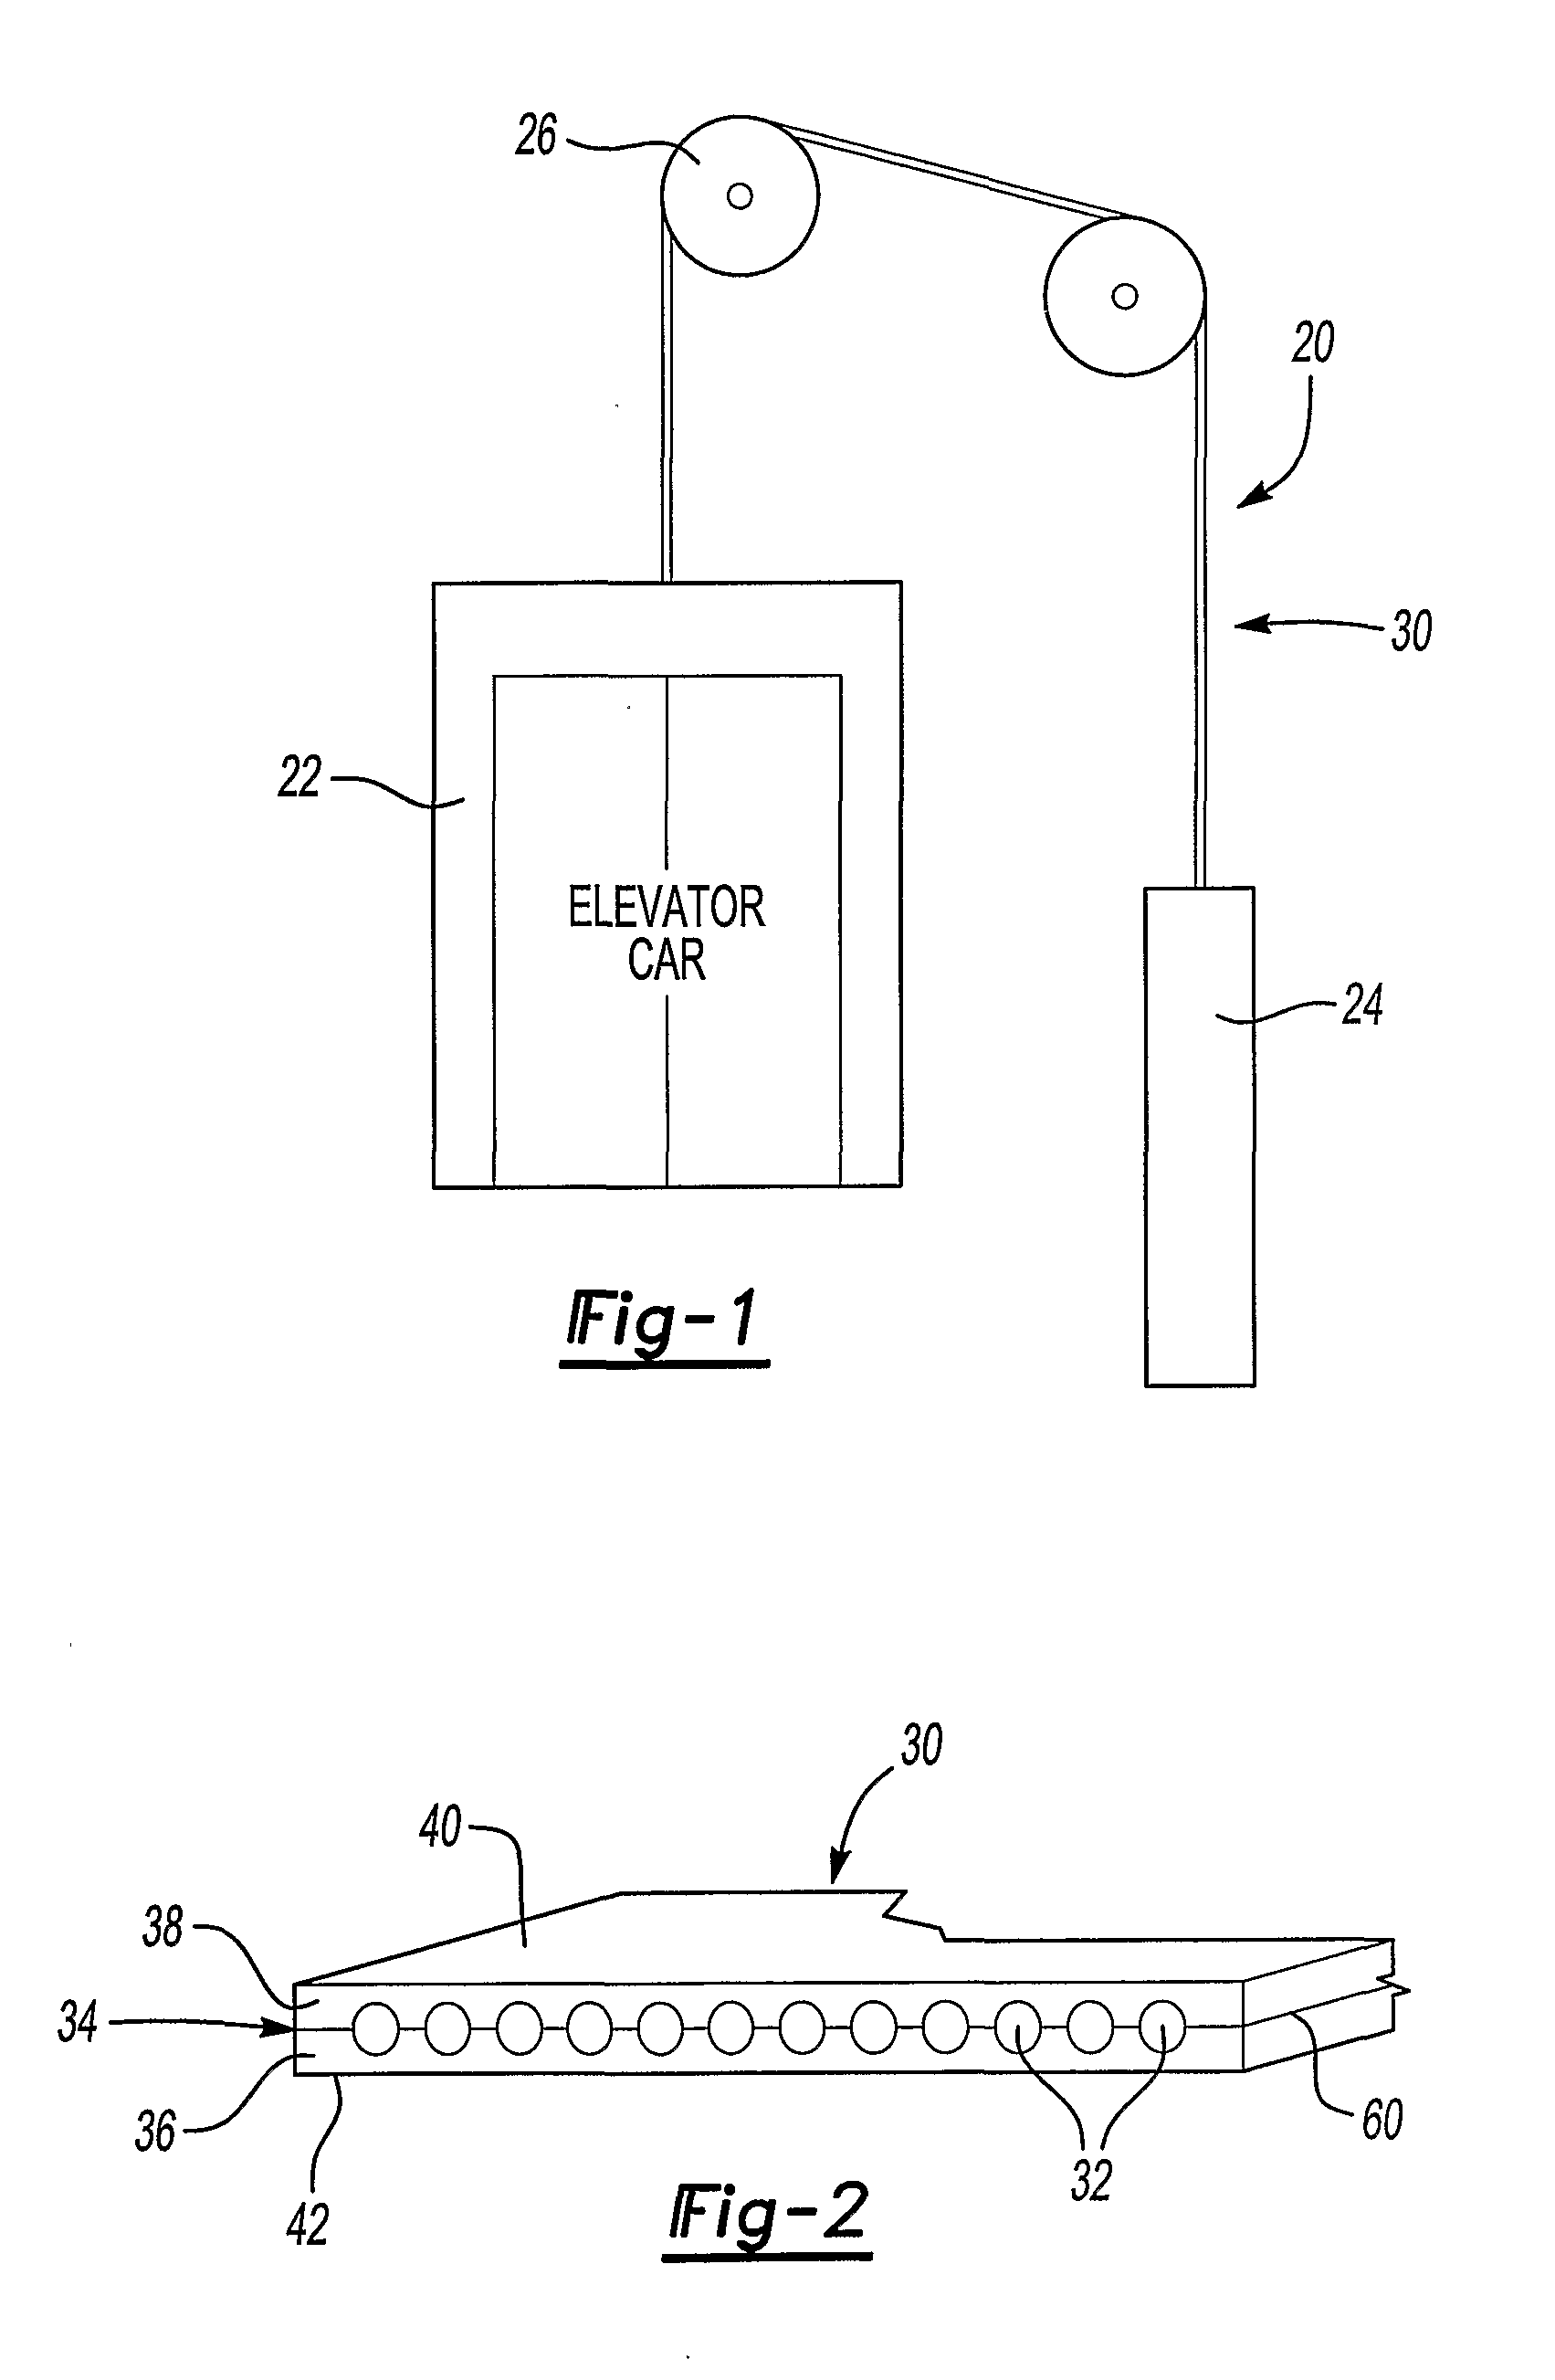 Method of Making a Load Bearing Member for an Elevator System